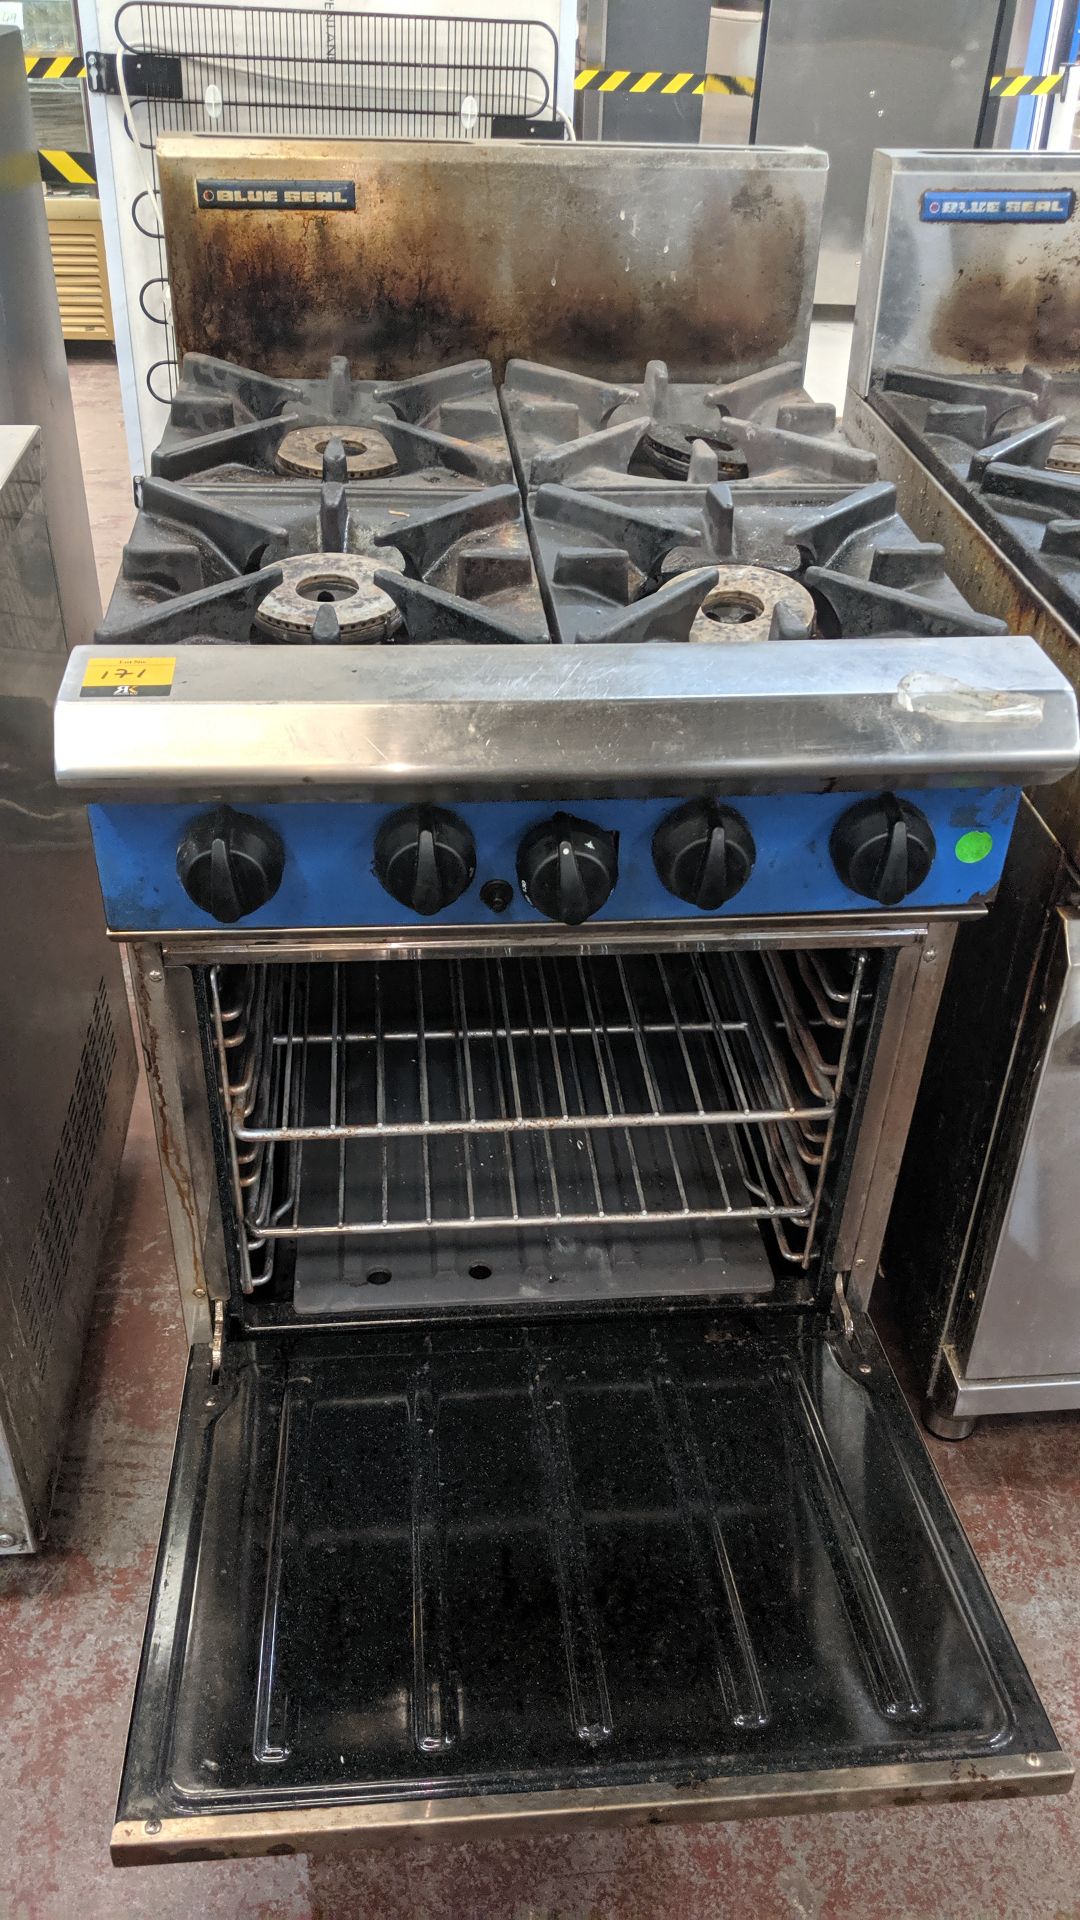 Blue Seal 4 ring gas oven - 9504DF IMPORTANT: Please remember goods successfully bid upon must be - Image 5 of 5